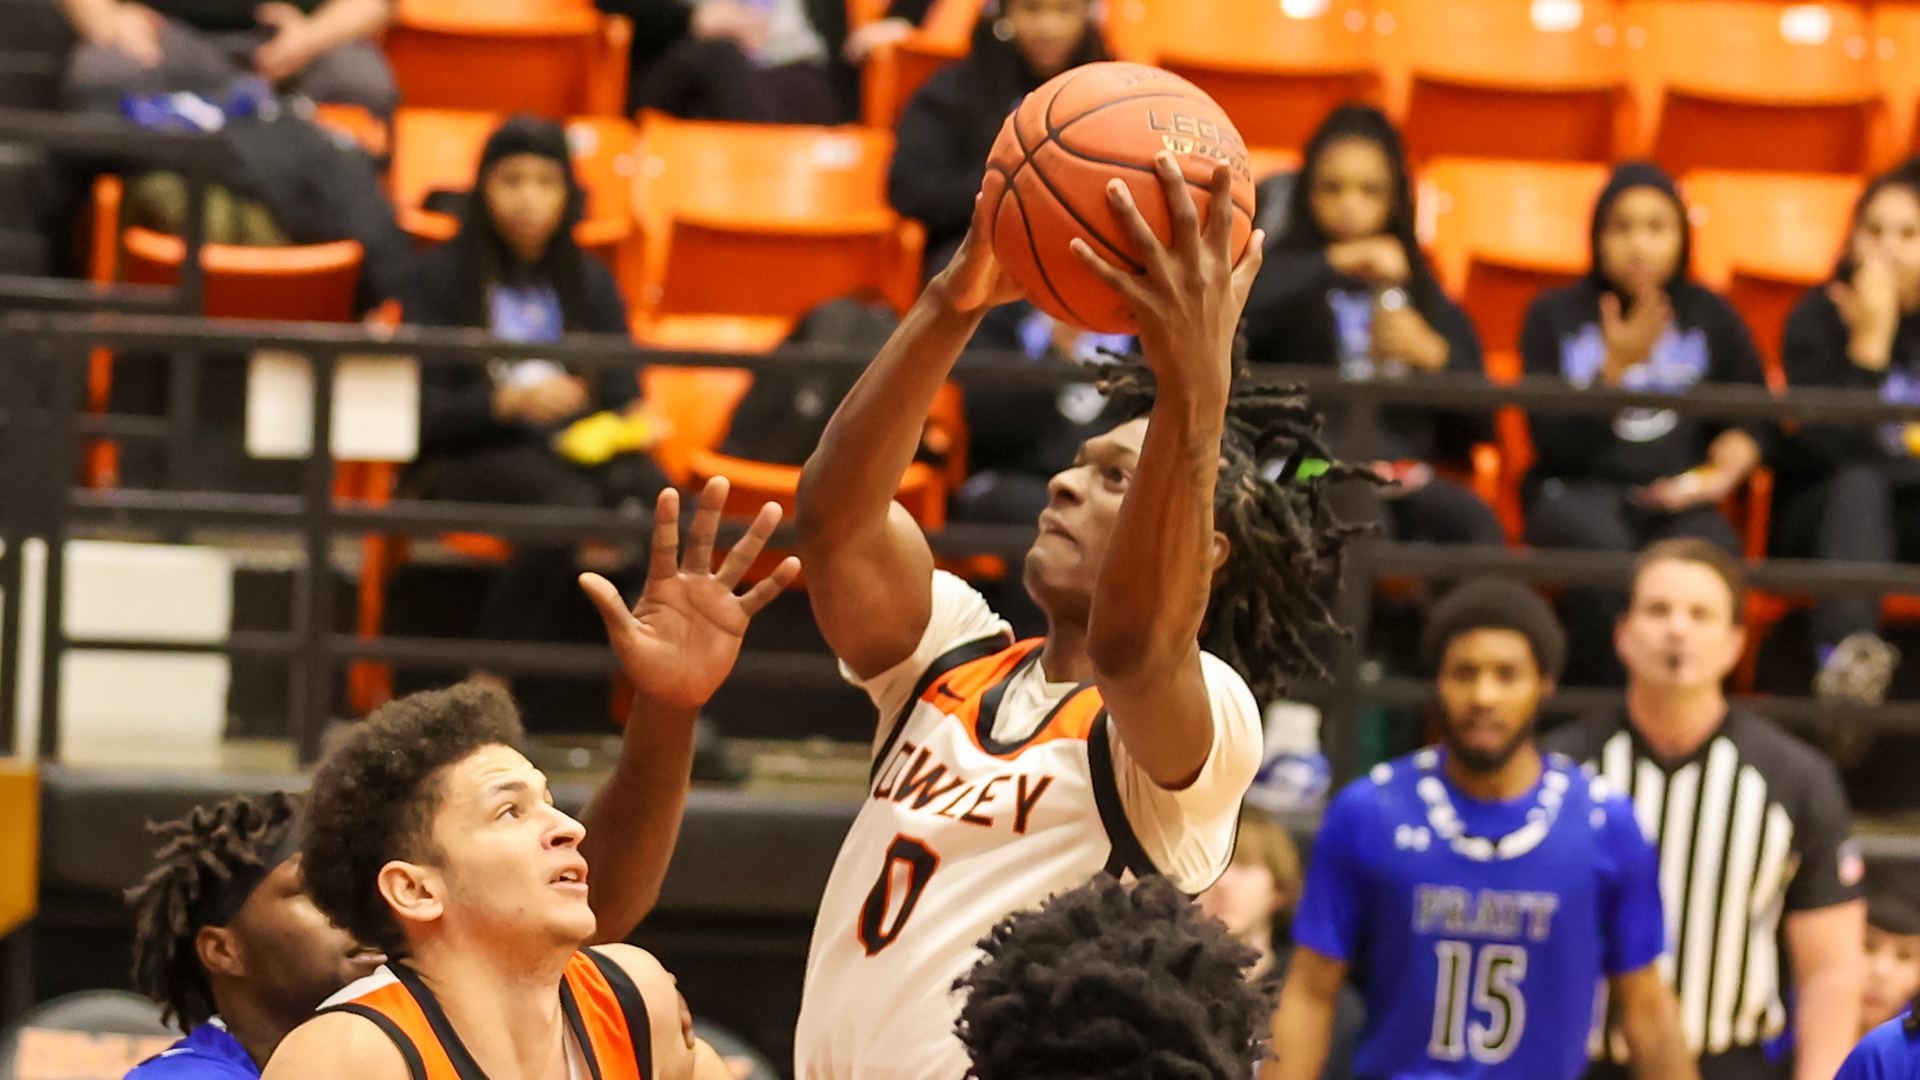 Tigers suffer first conference defeat, 78-62, at Cloud